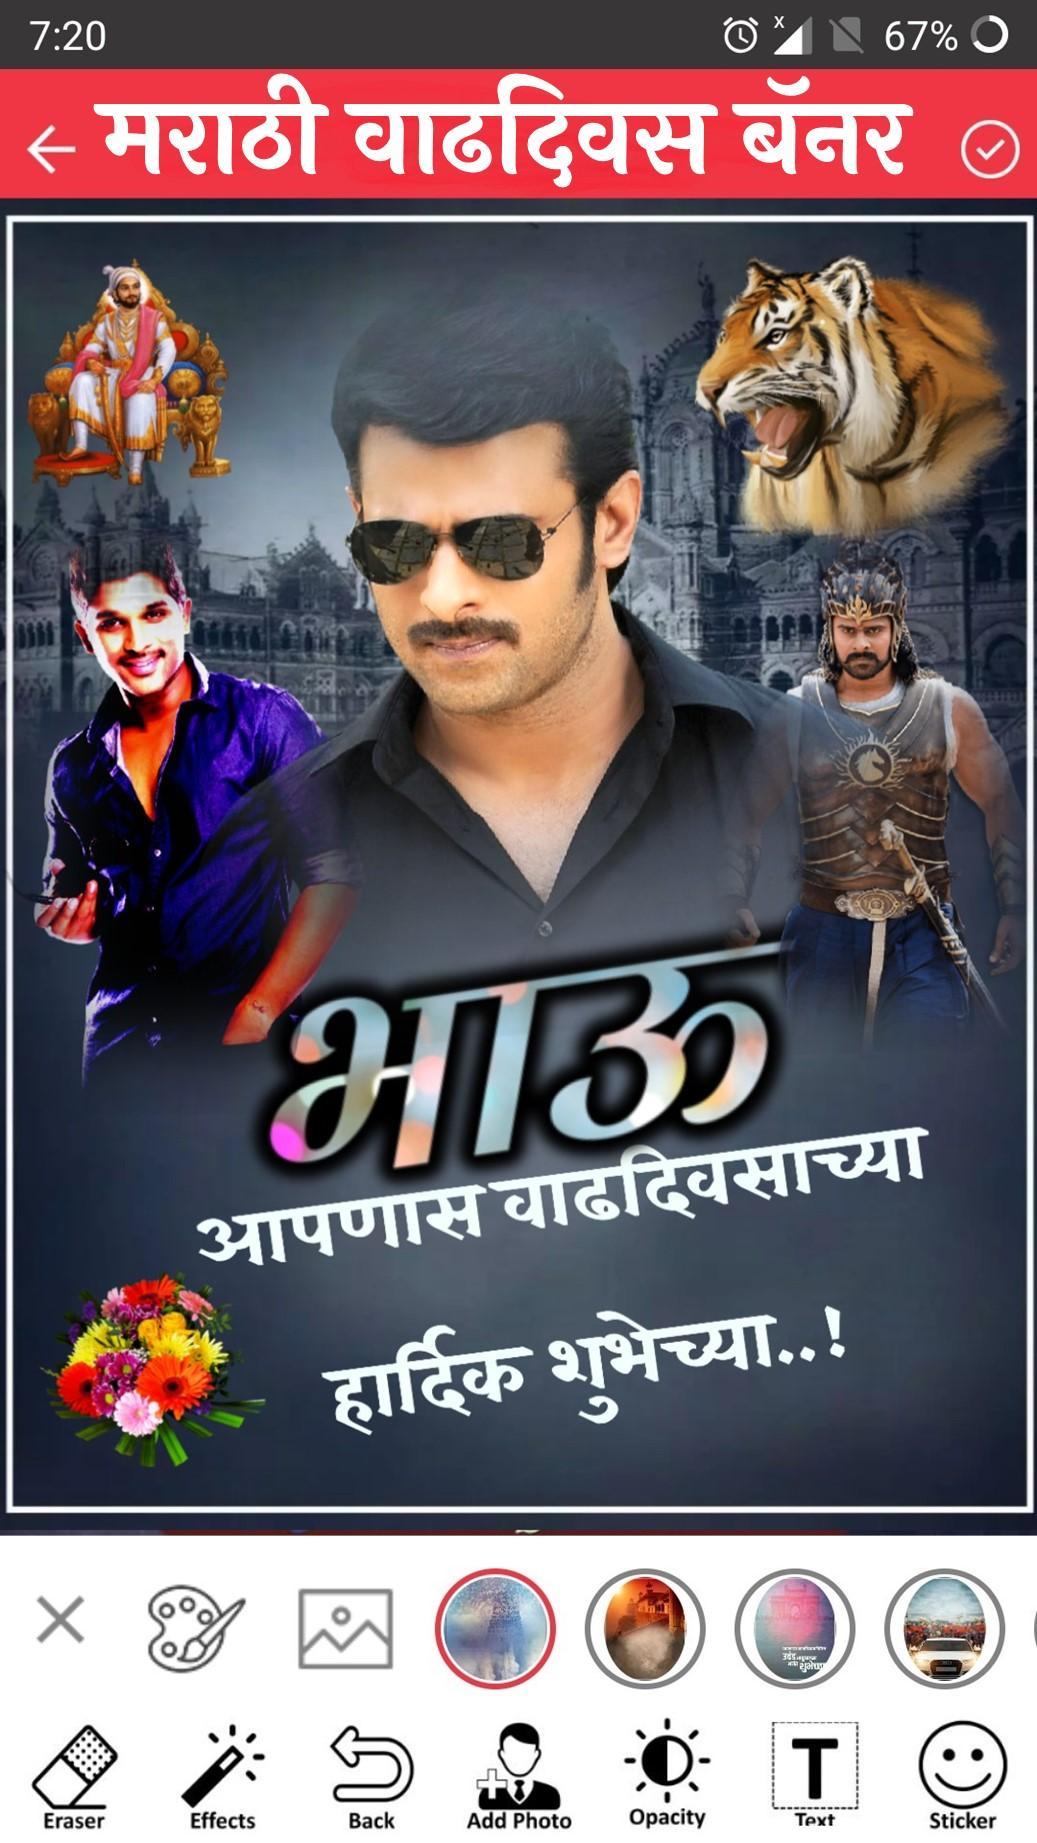 Marathi Happy Birthday Banner Maker Photo Editor For Android Apk Download